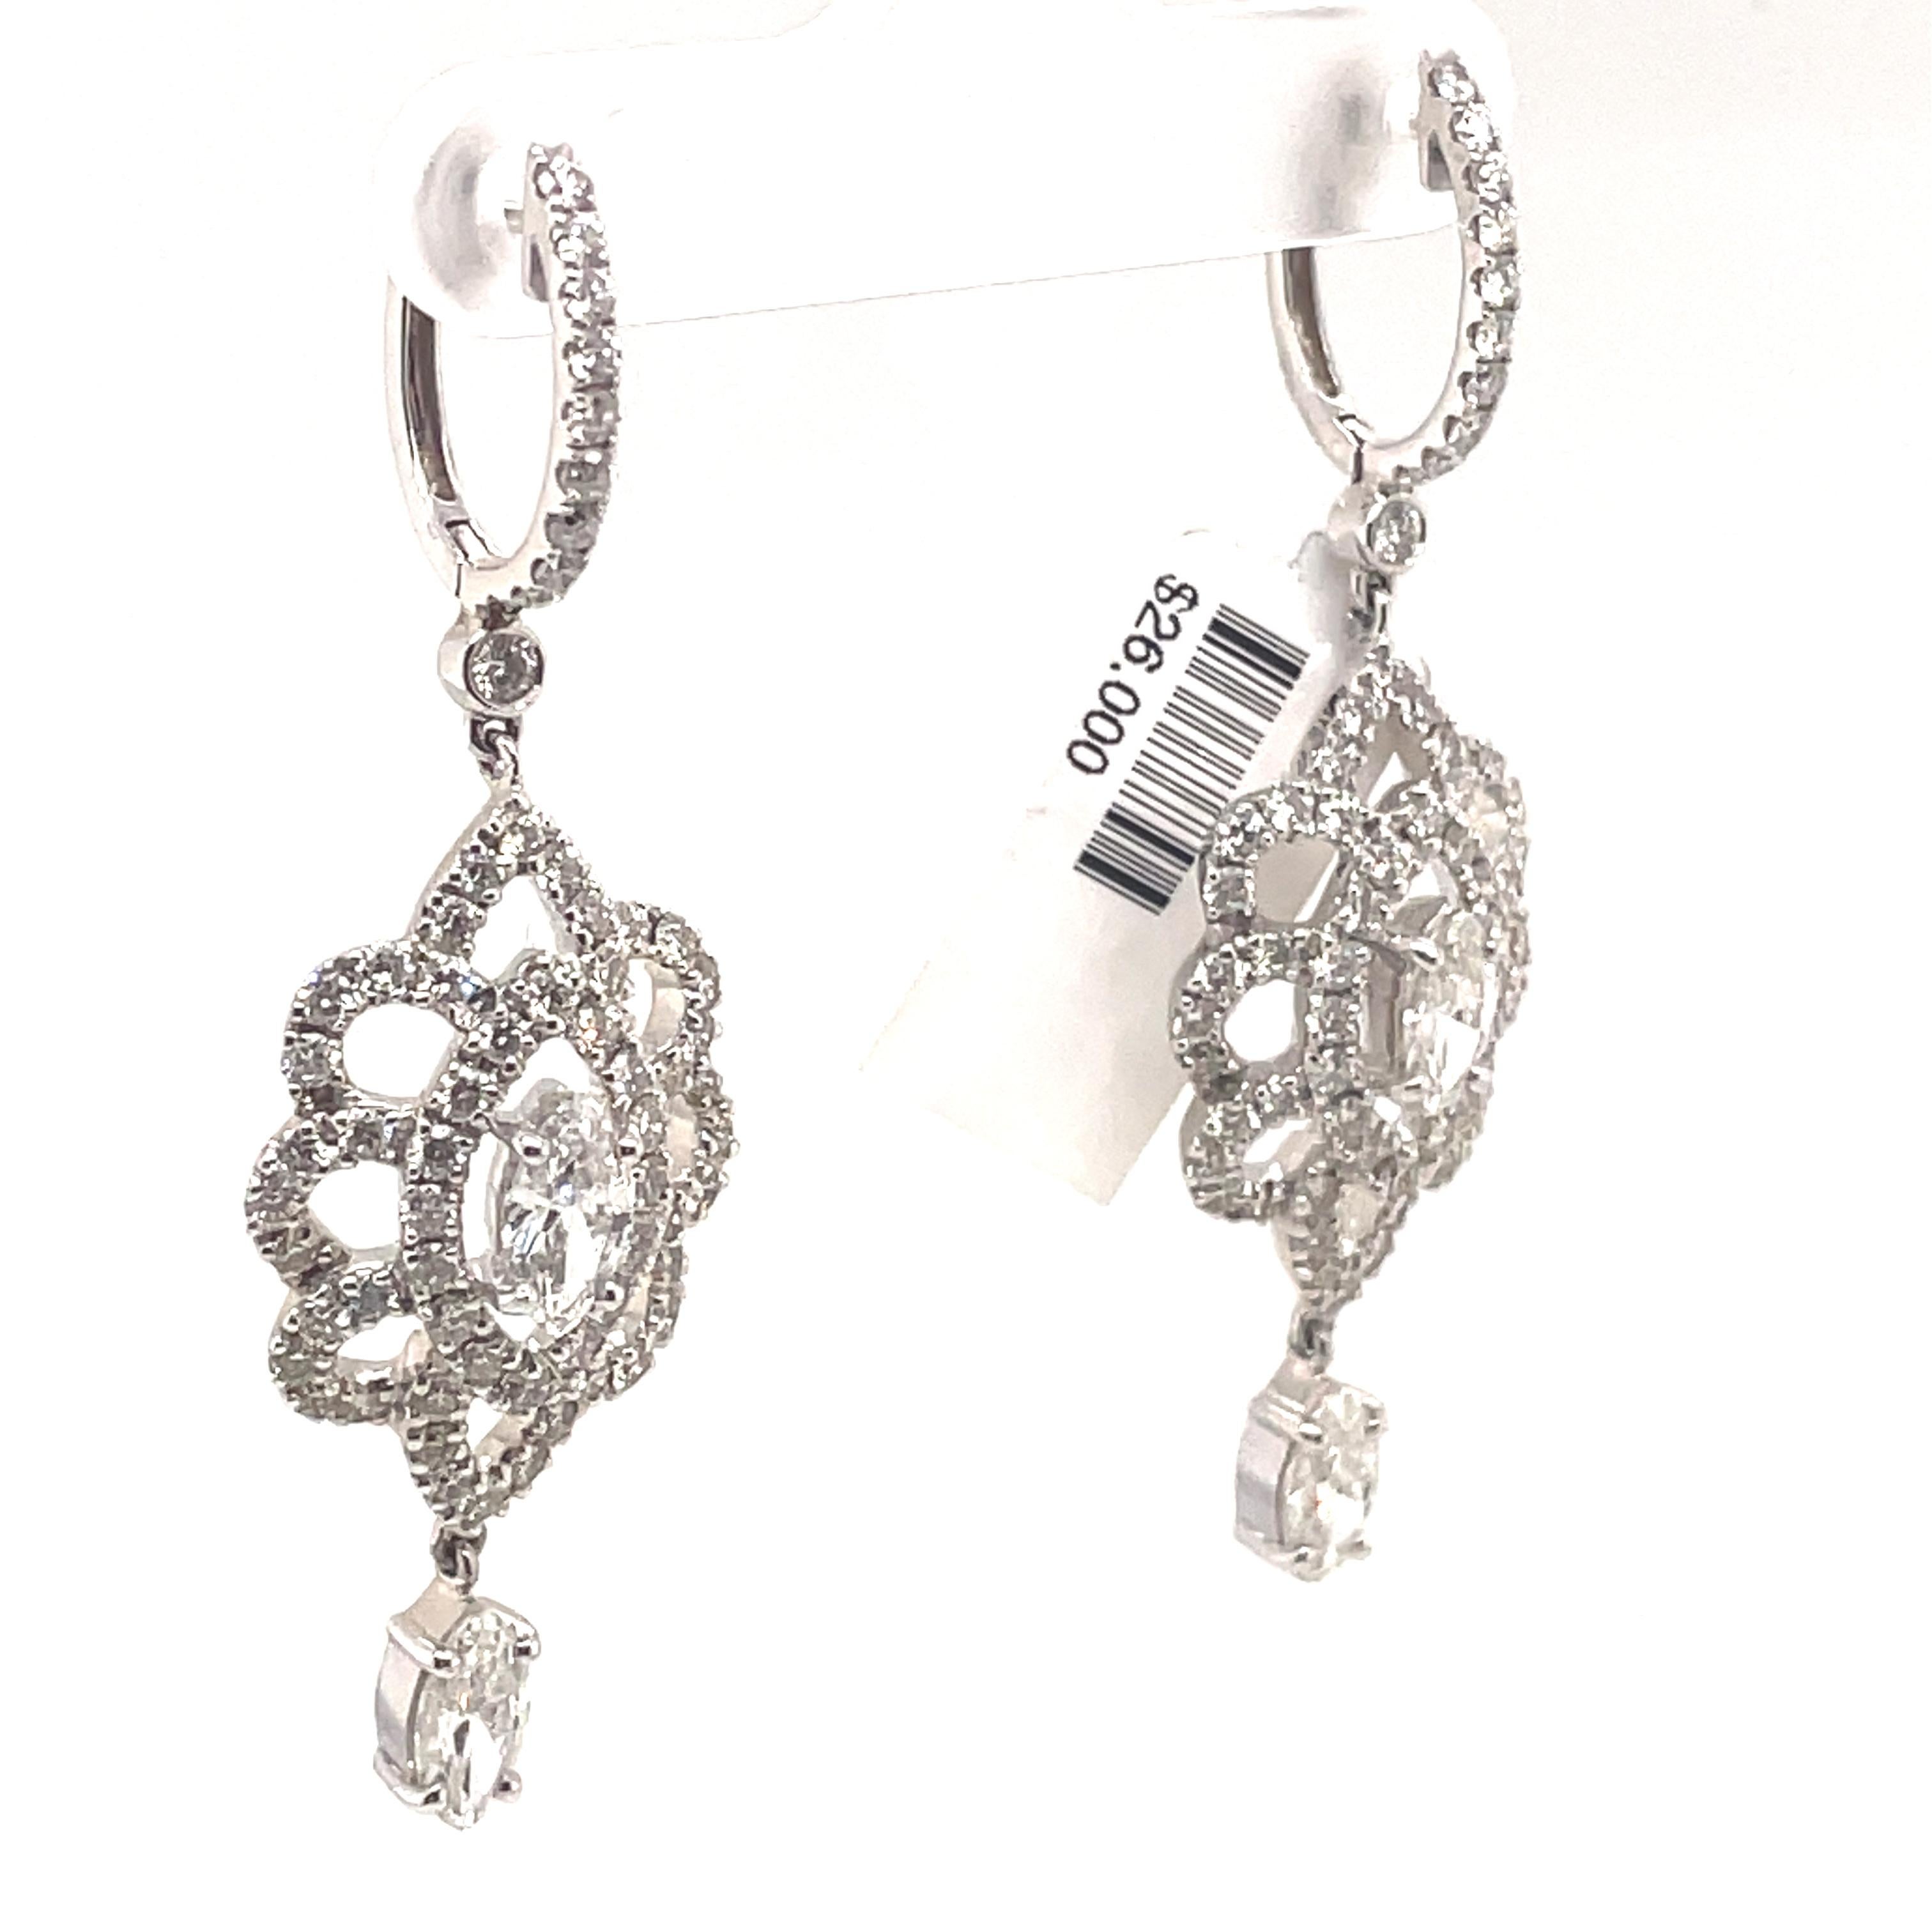 Contemporary 4.63ct Marques & Round Diamond Chandelier Earrings 18k White Gold